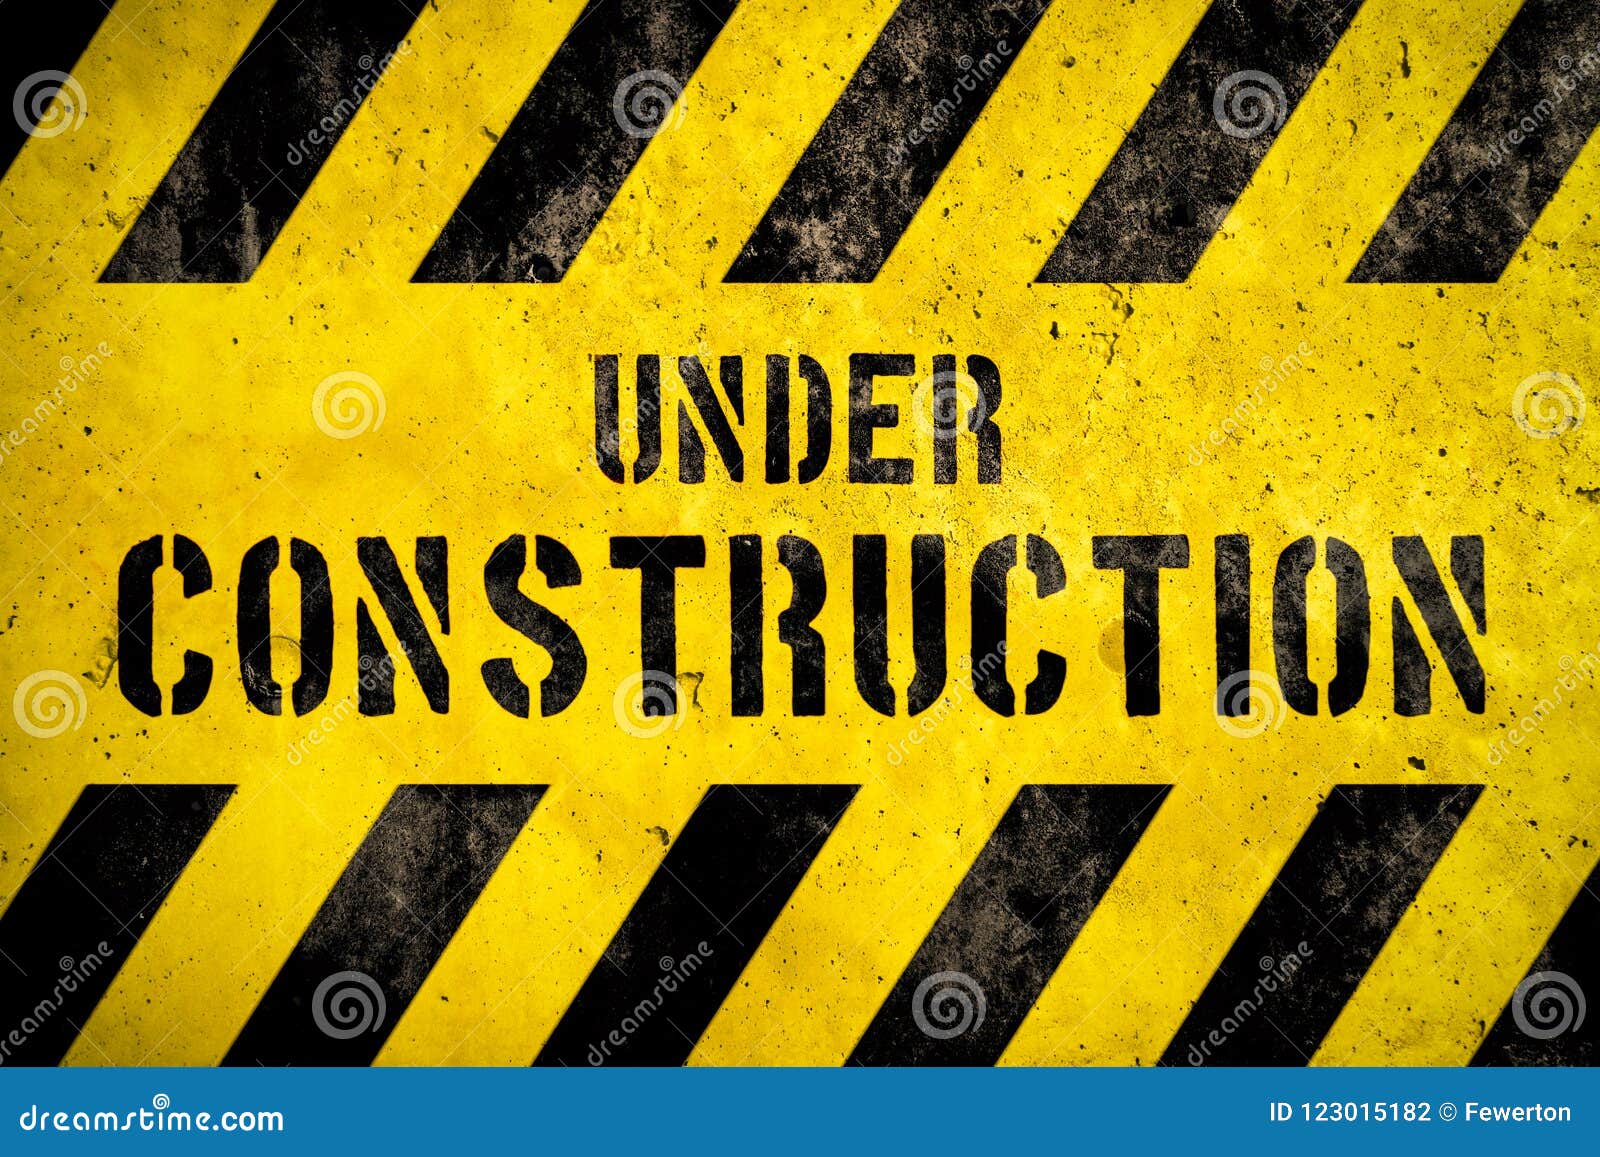 Under Construction Warning Sign Text with Yellow Black Stripes Painted ...